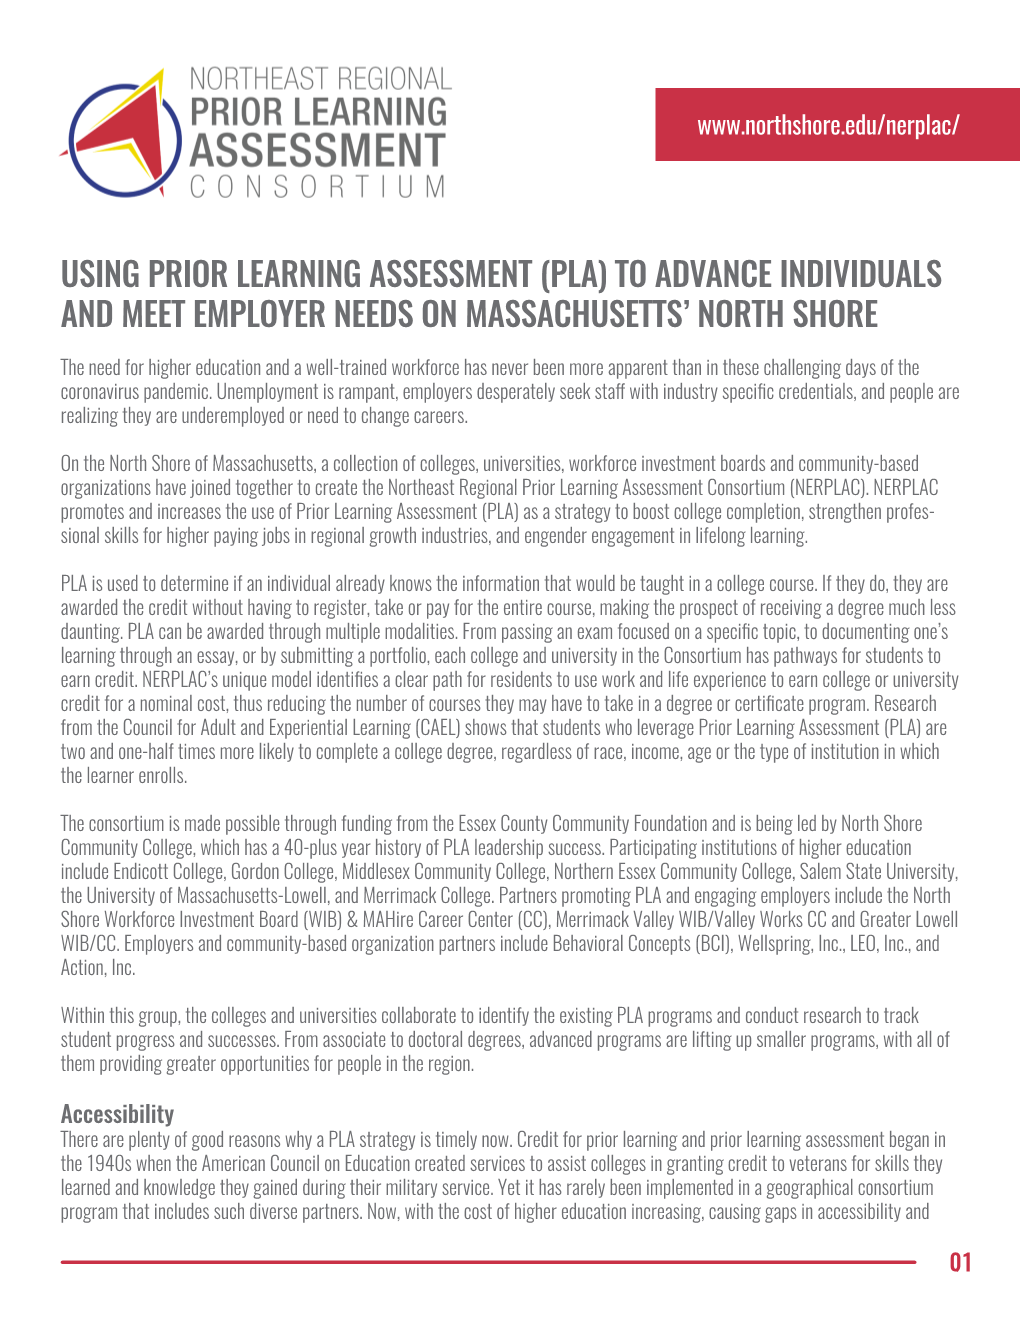 Using Prior Learning Assessment (Pla) to Advance Individuals and Meet Employer Needs on Massachusetts’ North Shore